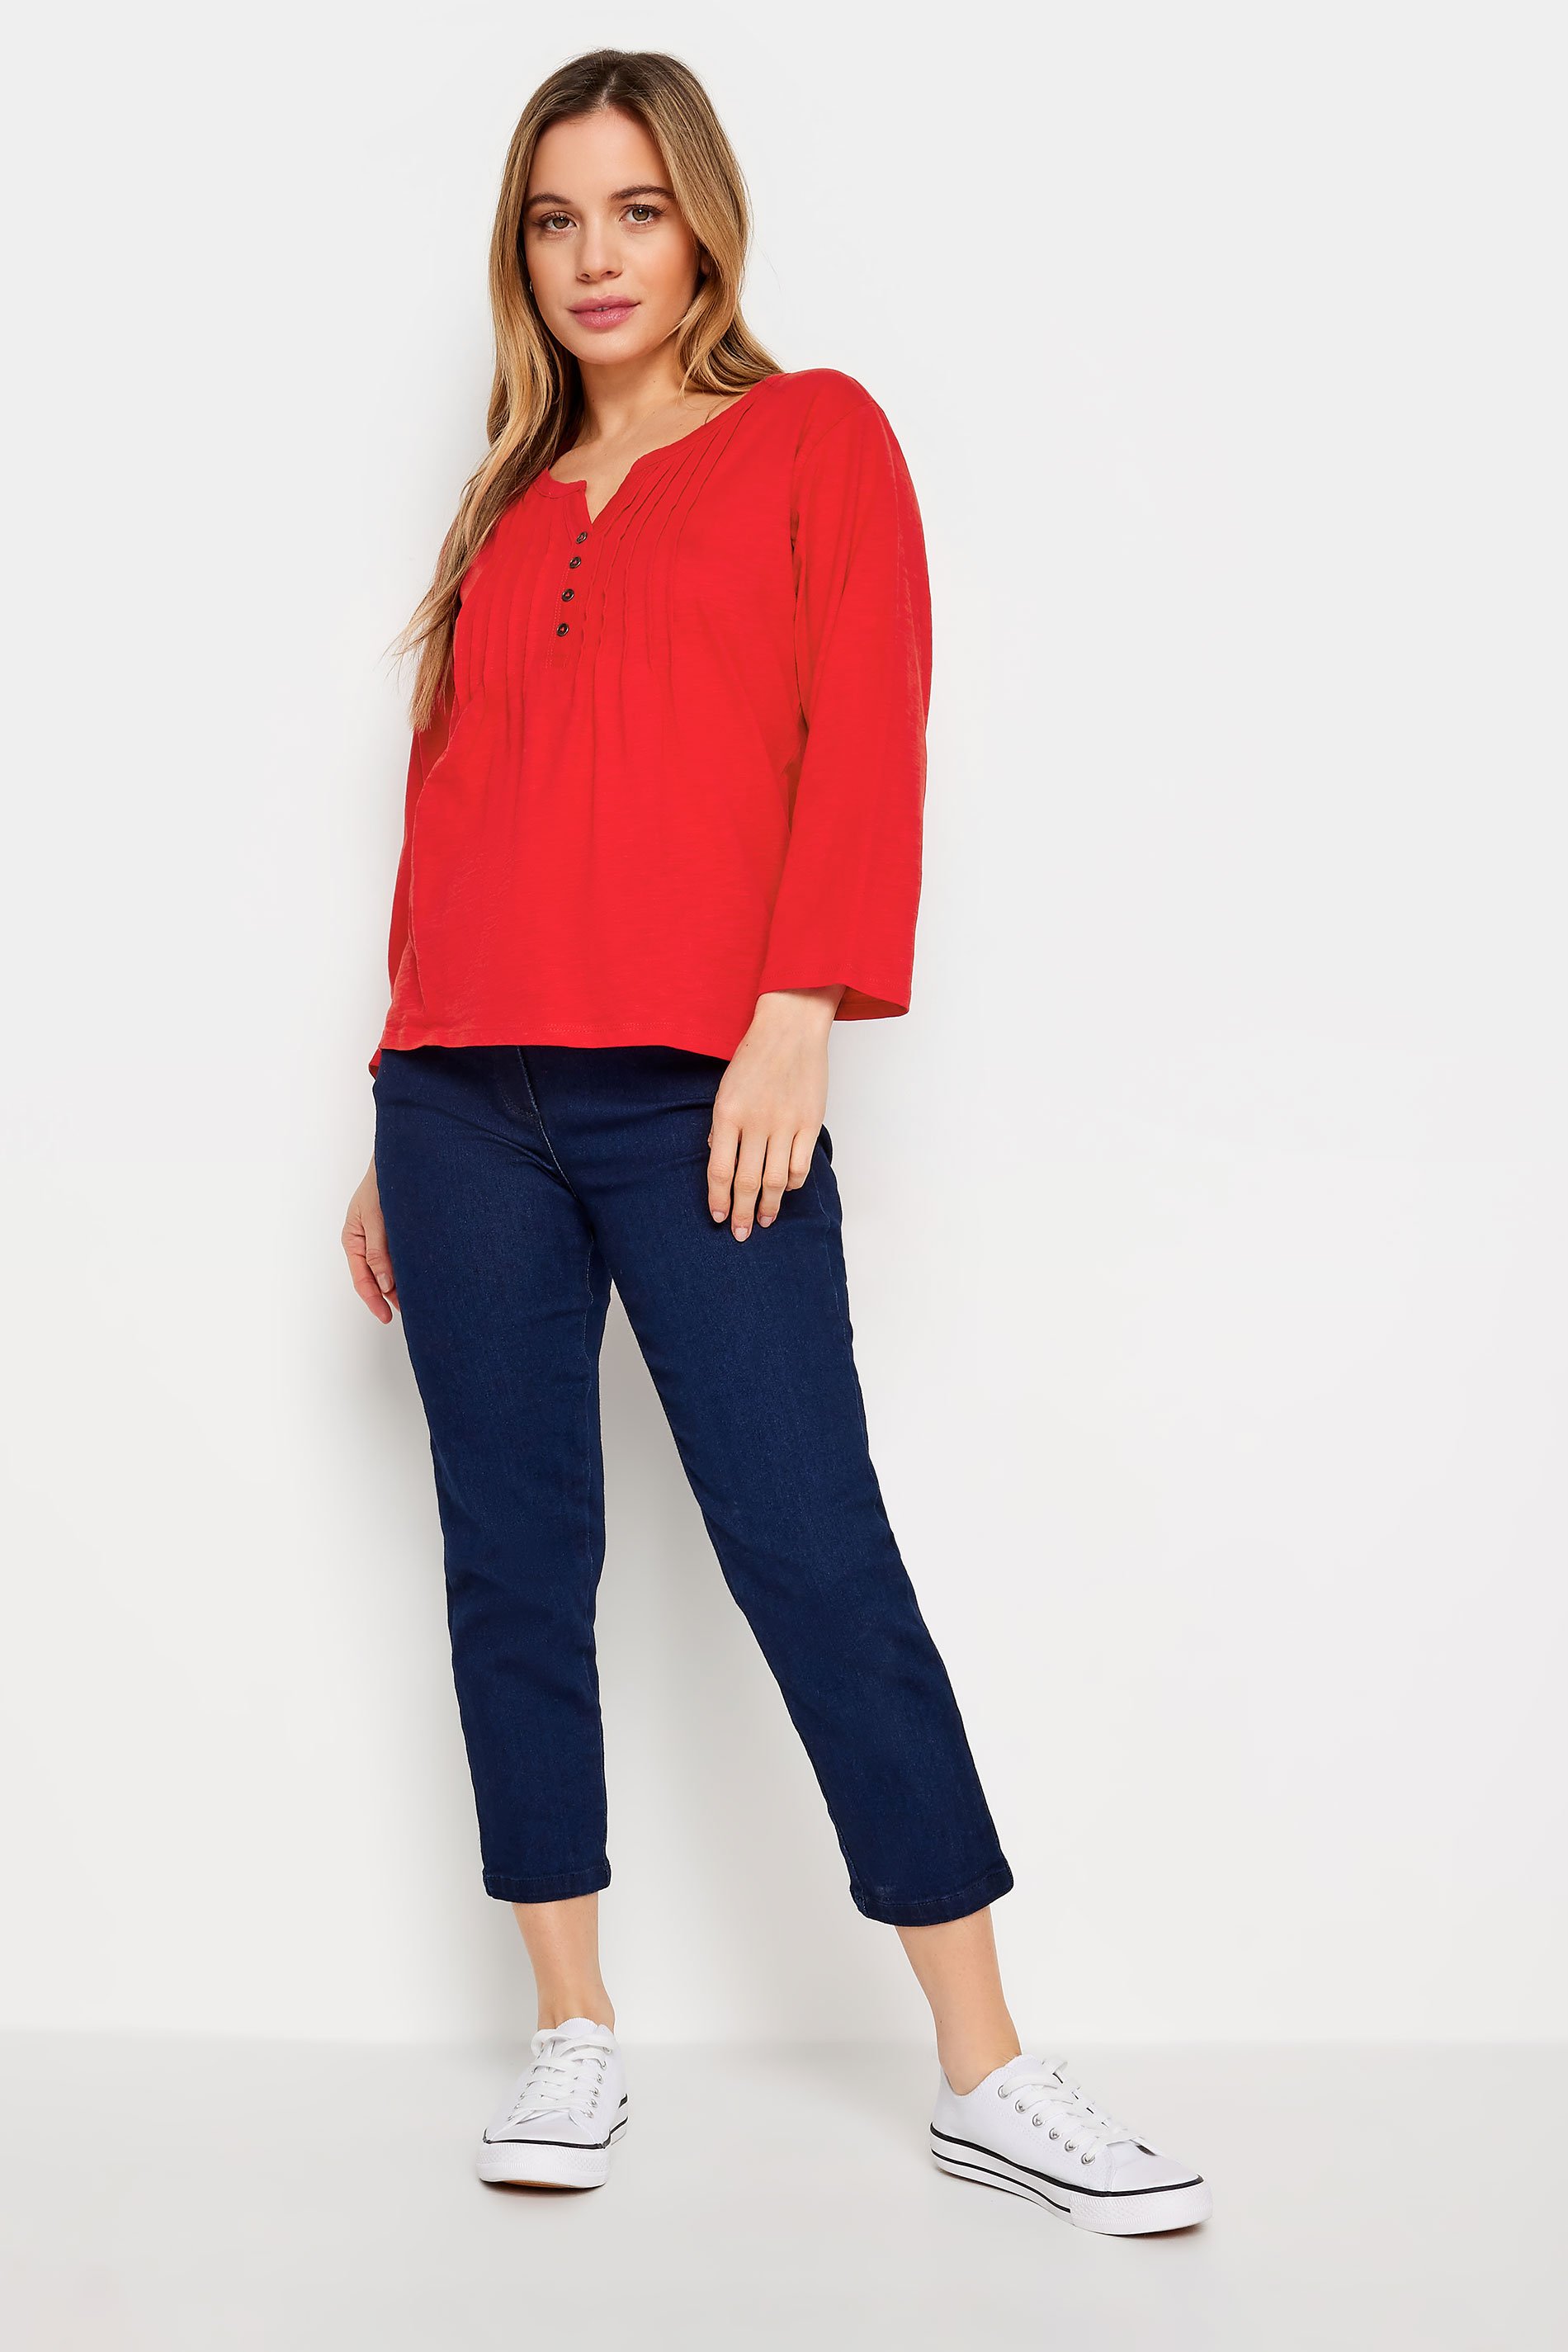 M&Co Petite Bright Red Cotton Henley Top | M&Co 2